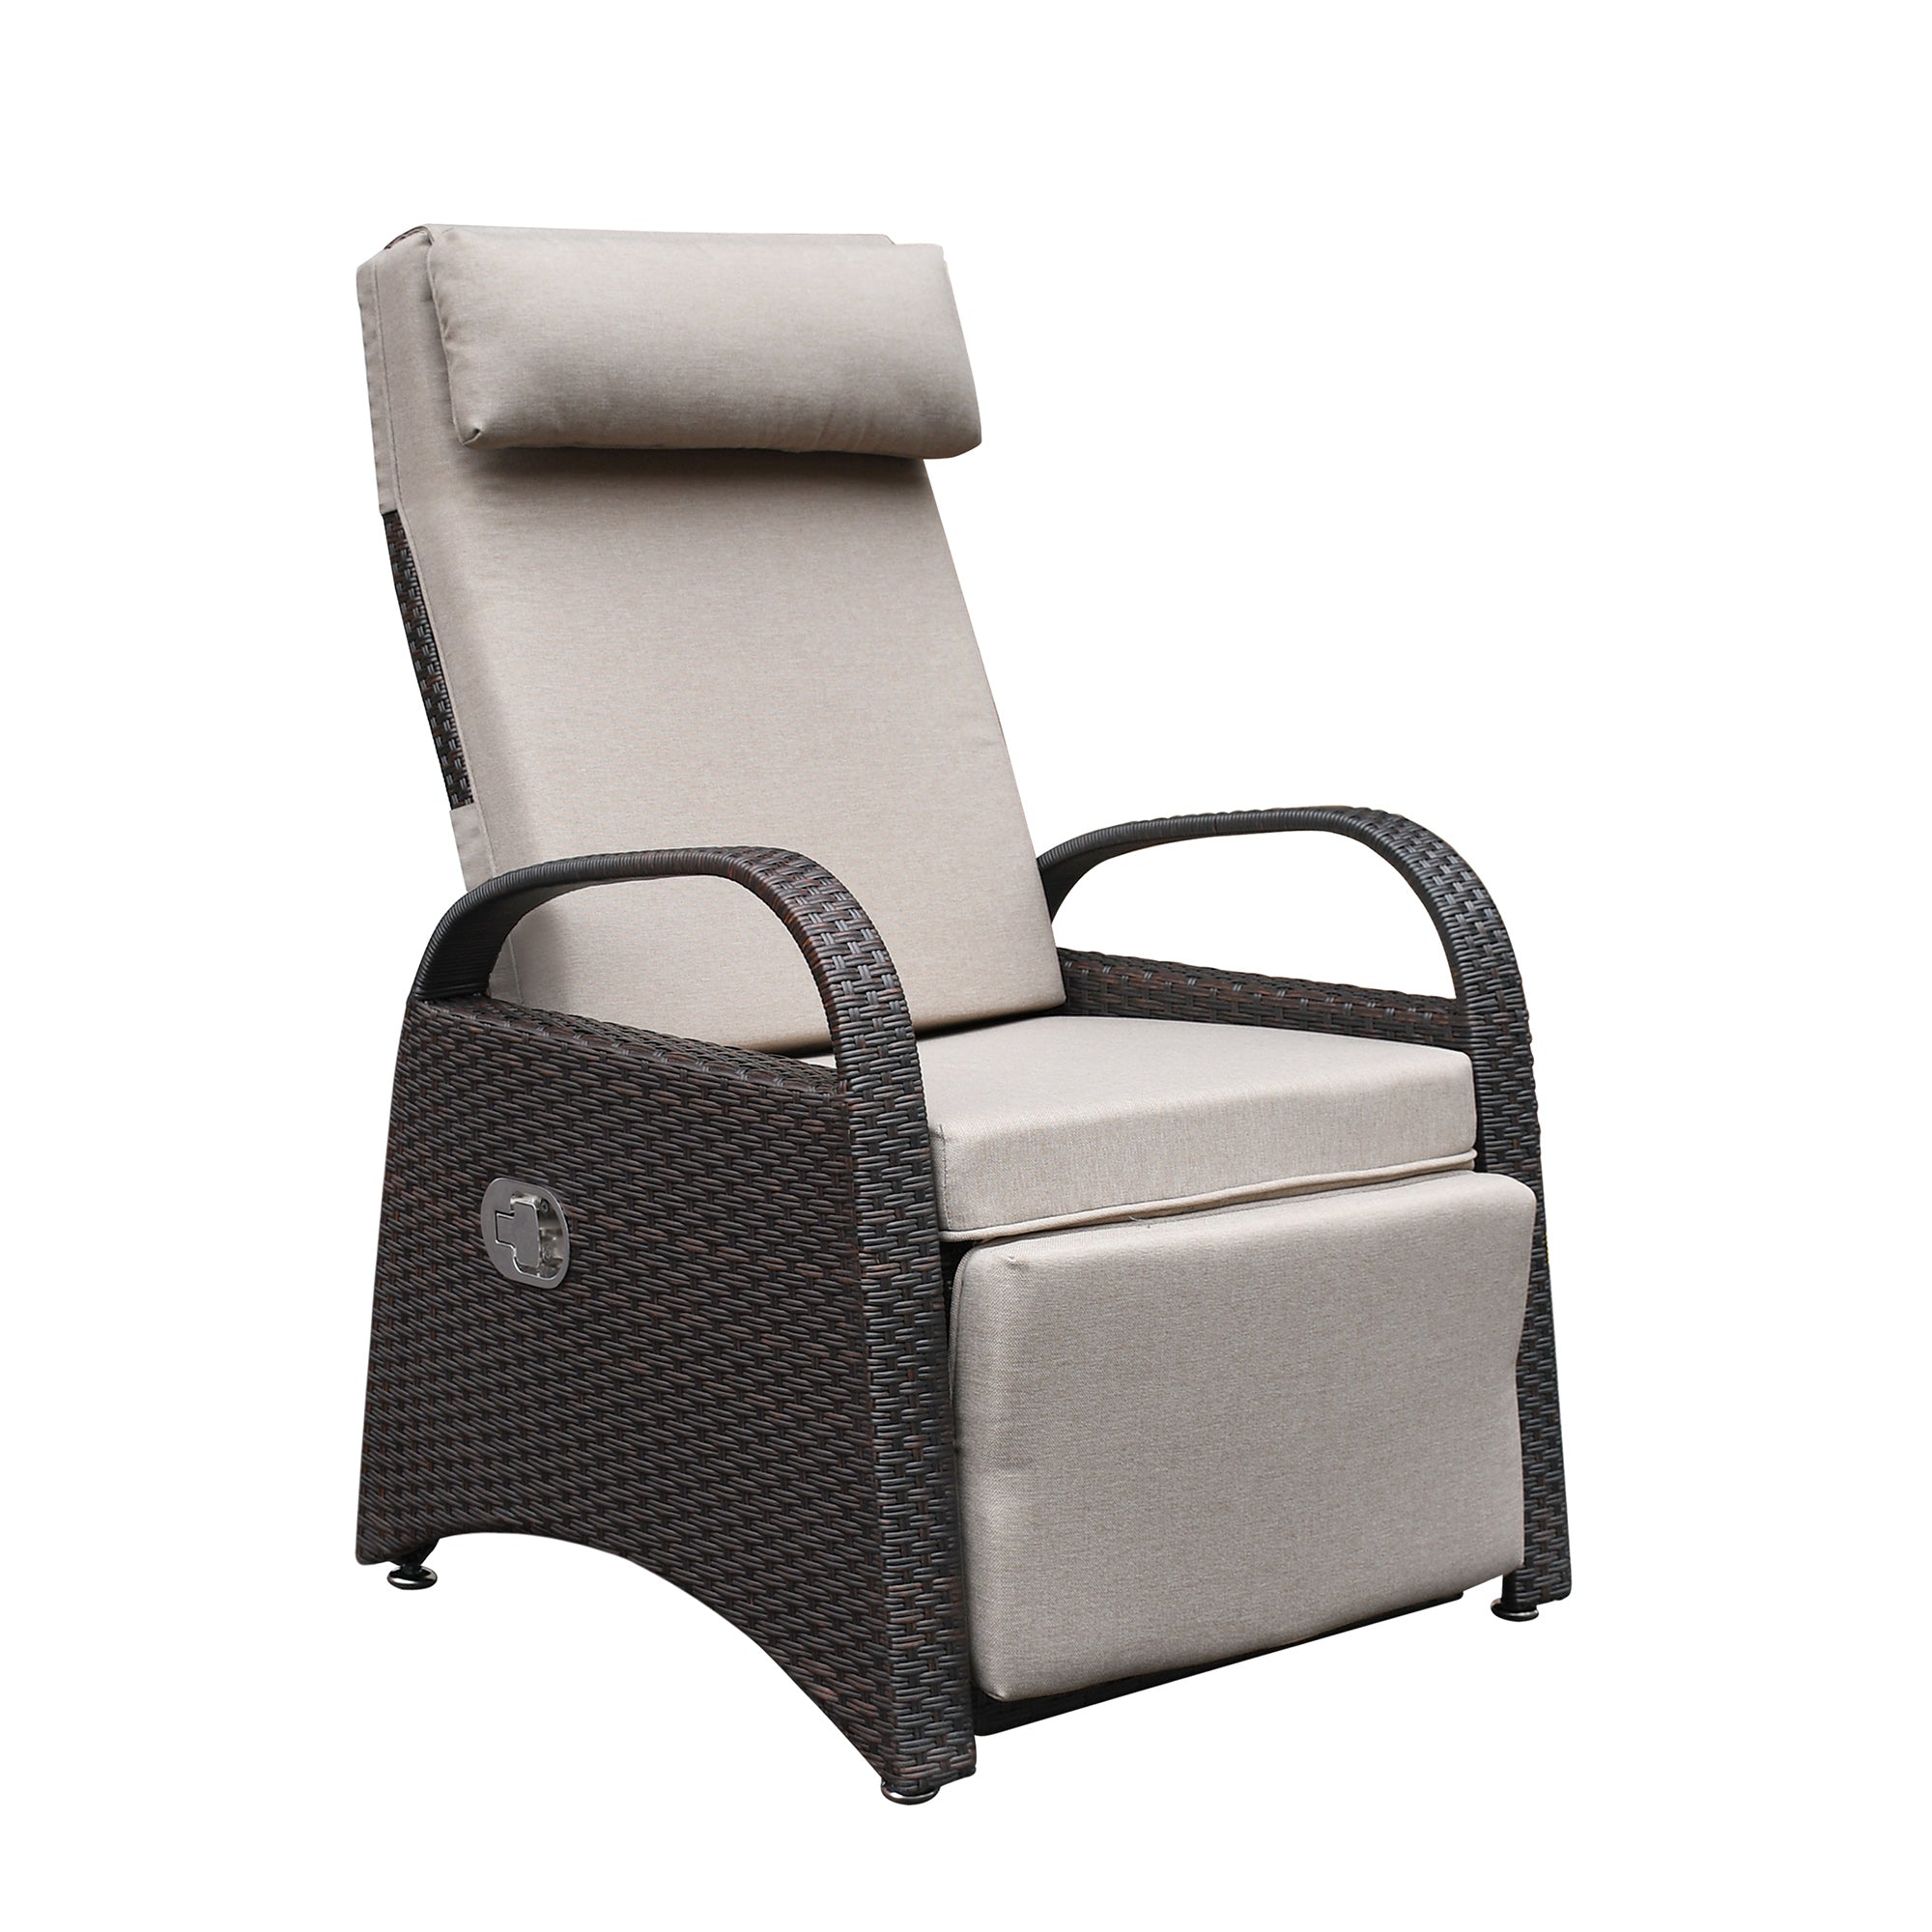 ZNTS Outdoor Recliner Chair,PE Wicker Adjustable Reclining Lounge Chair and Removable Soft Cushion, with W1889107782